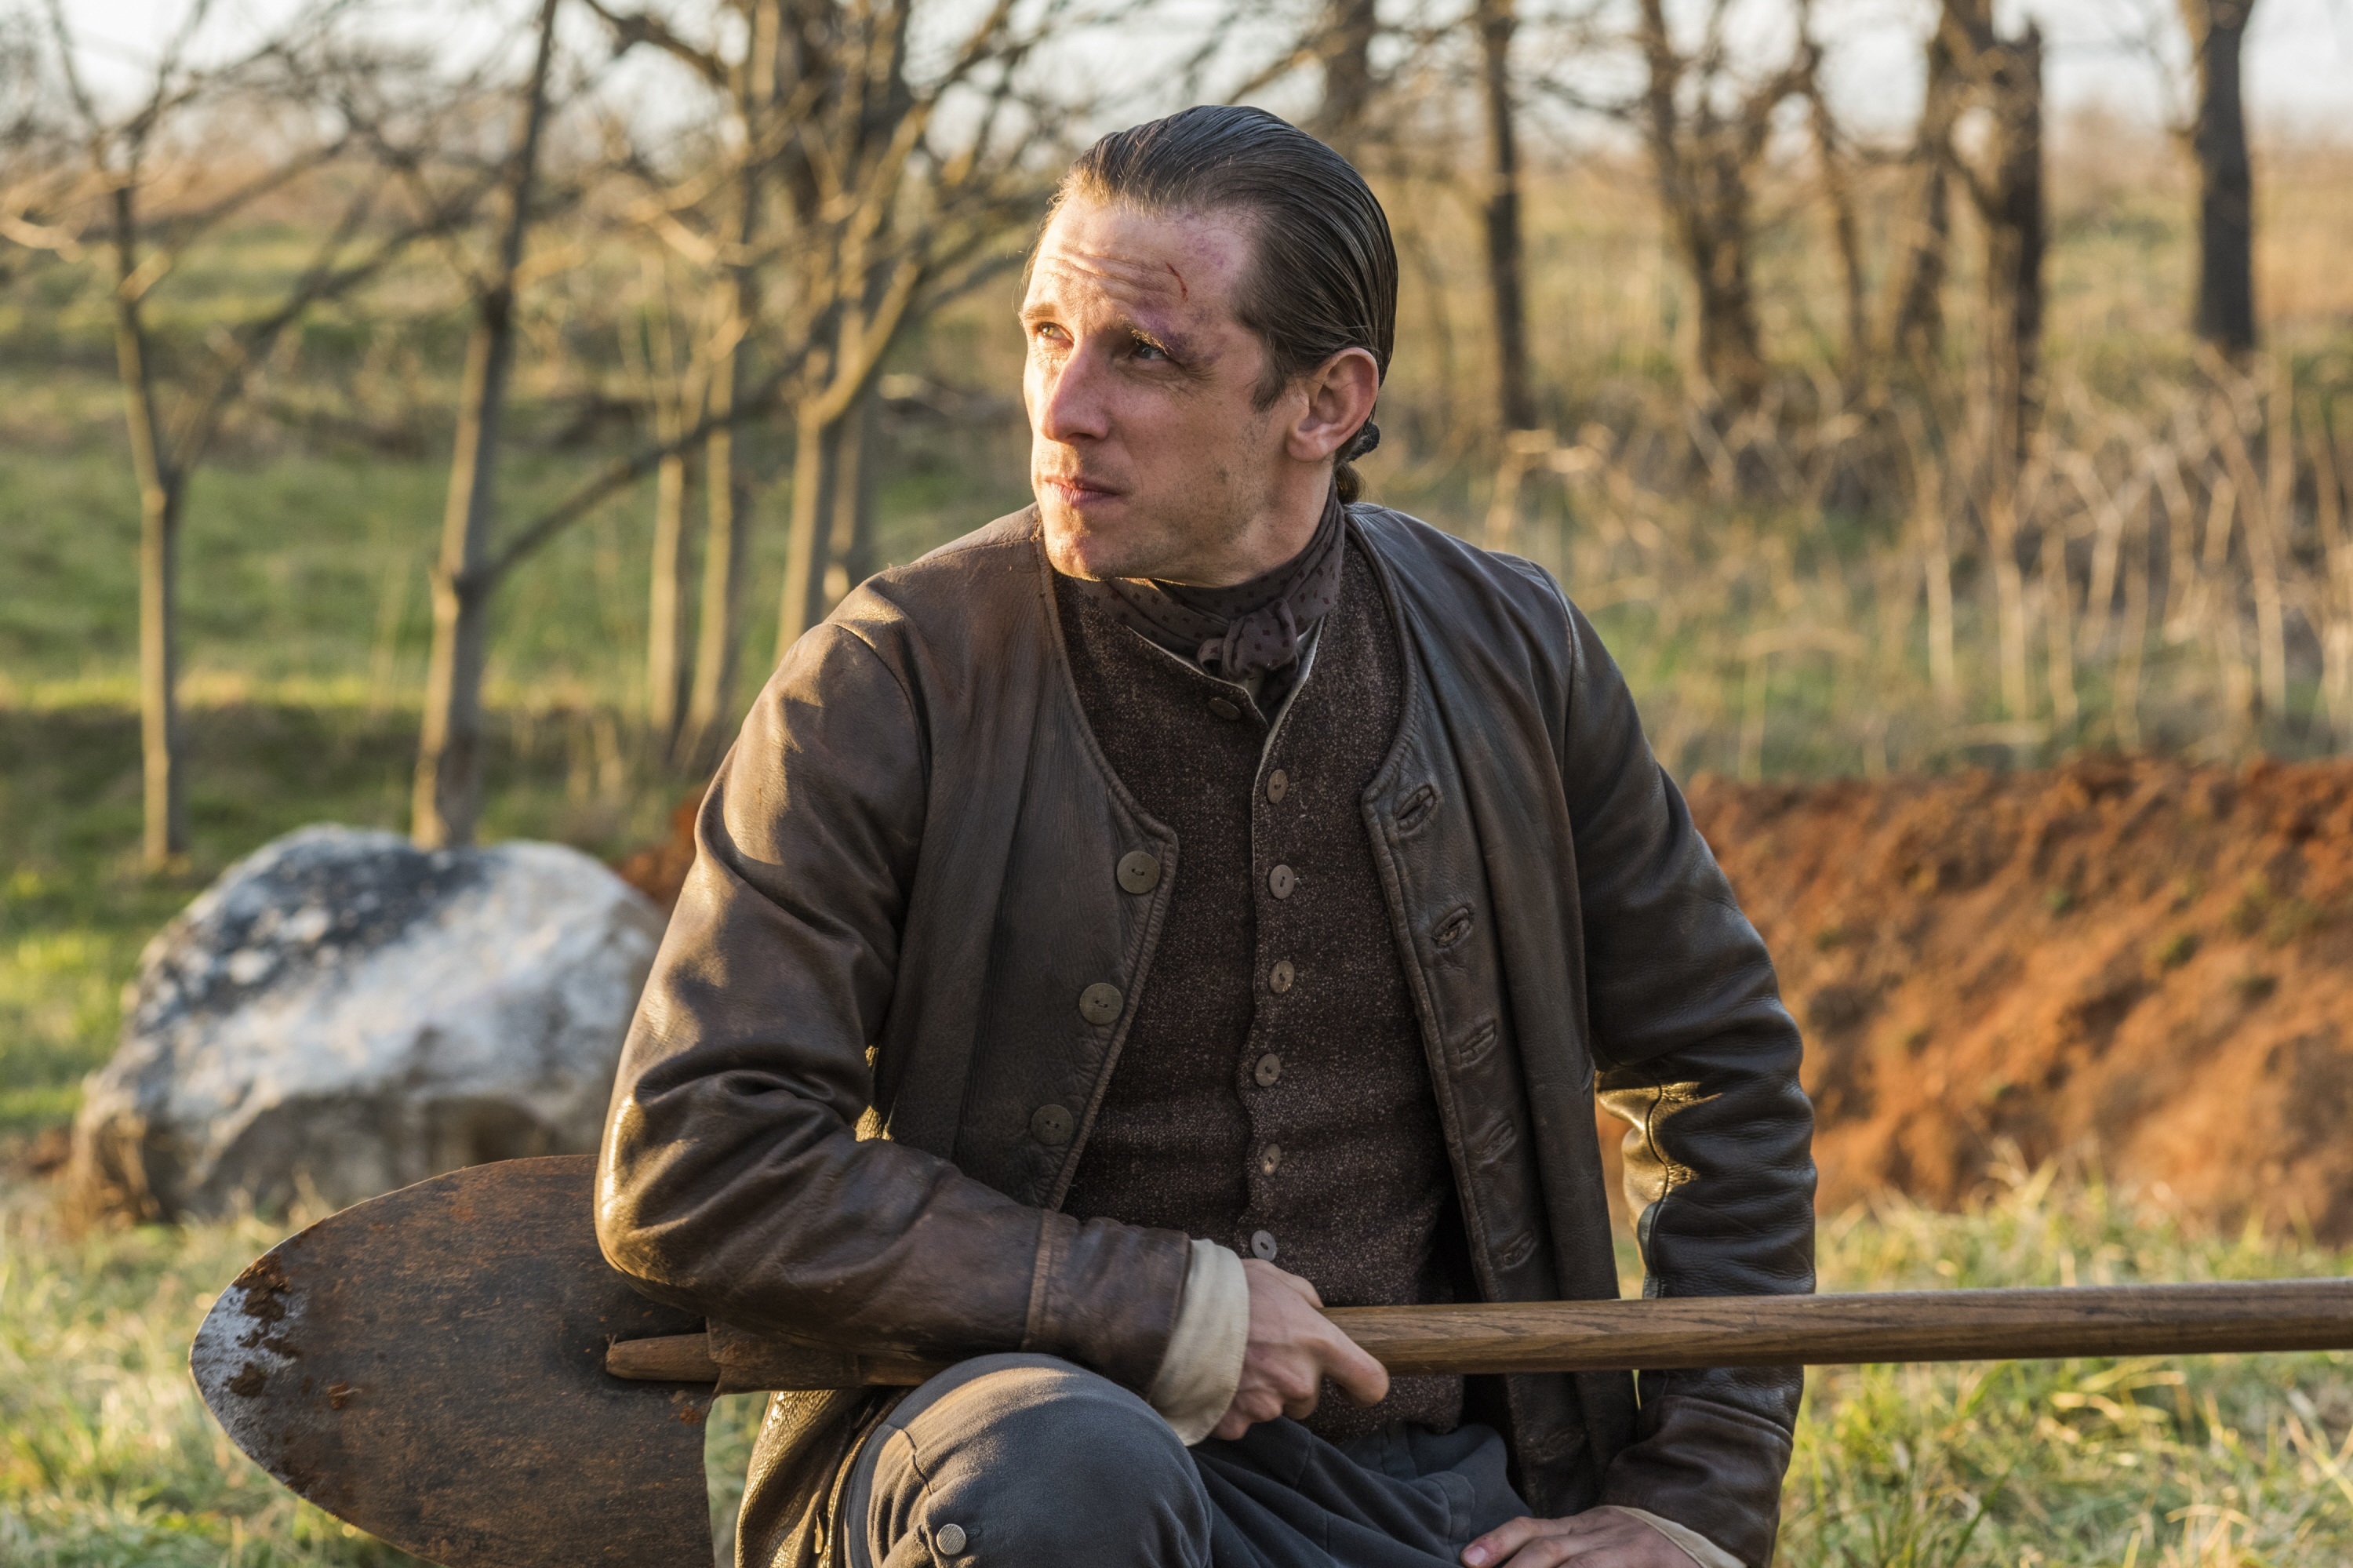 <p>In 2017, the fourth and final season of "Turn: Washington's Spies" aired on AMC. It starred Jamie Bell as Abraham Woodhull (aka Samuel Culper), the leader of a band of spies called the Culper Ring. This historical war drama, which was based on real-life events, started in 1776 and followed Abe and his friends as they worked together to spy for General George Washington, helping his fight for American independence.</p>